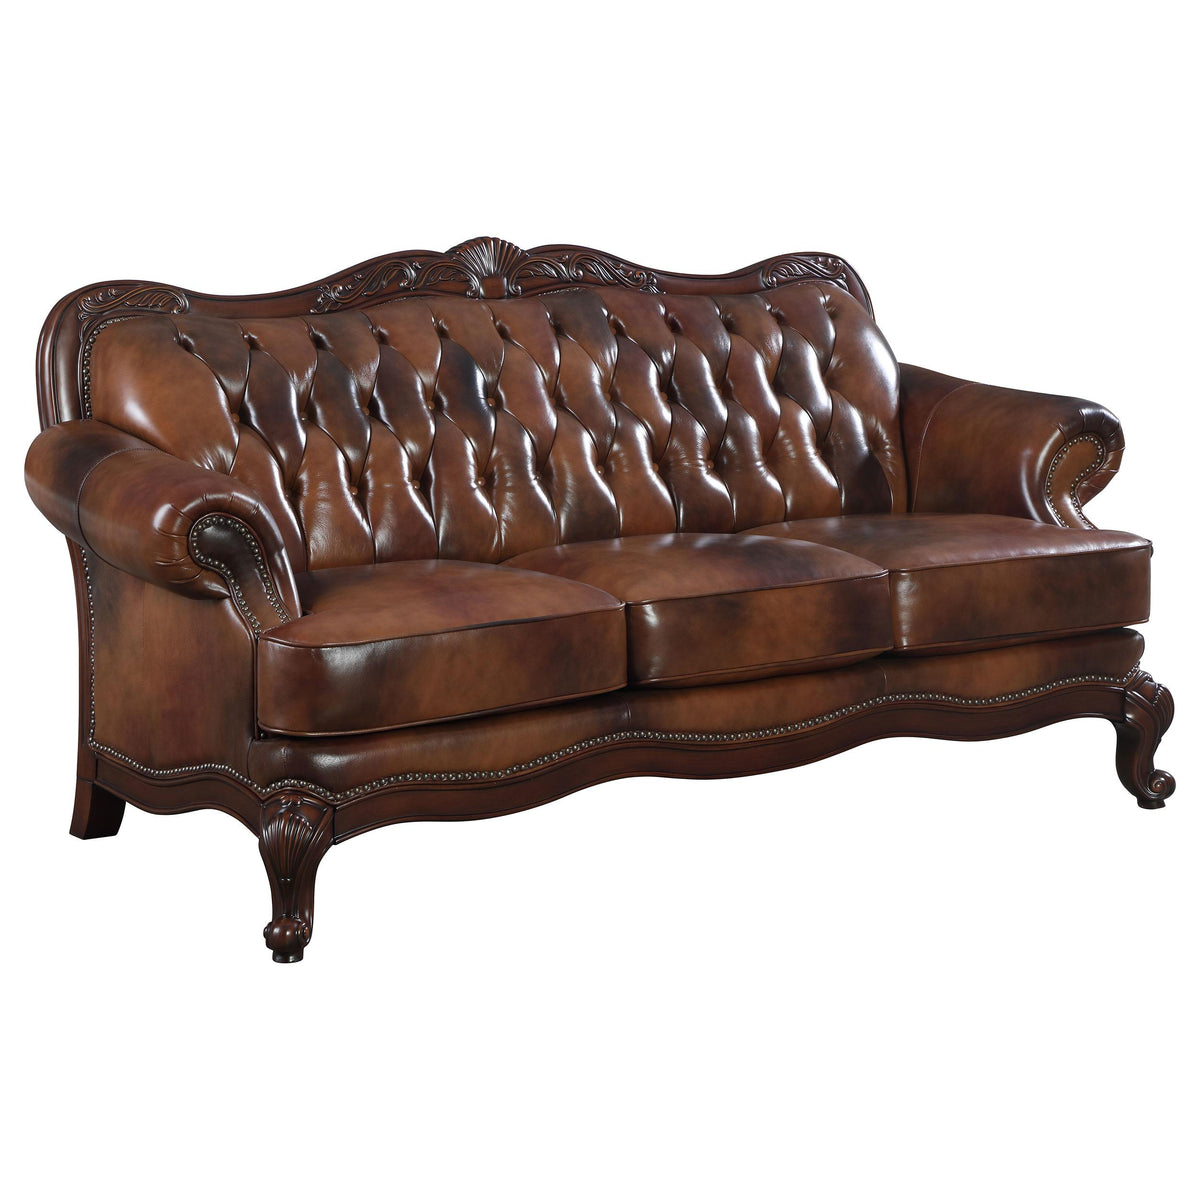 Victoria Rolled Arm Sofa Tri-tone and Brown  Las Vegas Furniture Stores